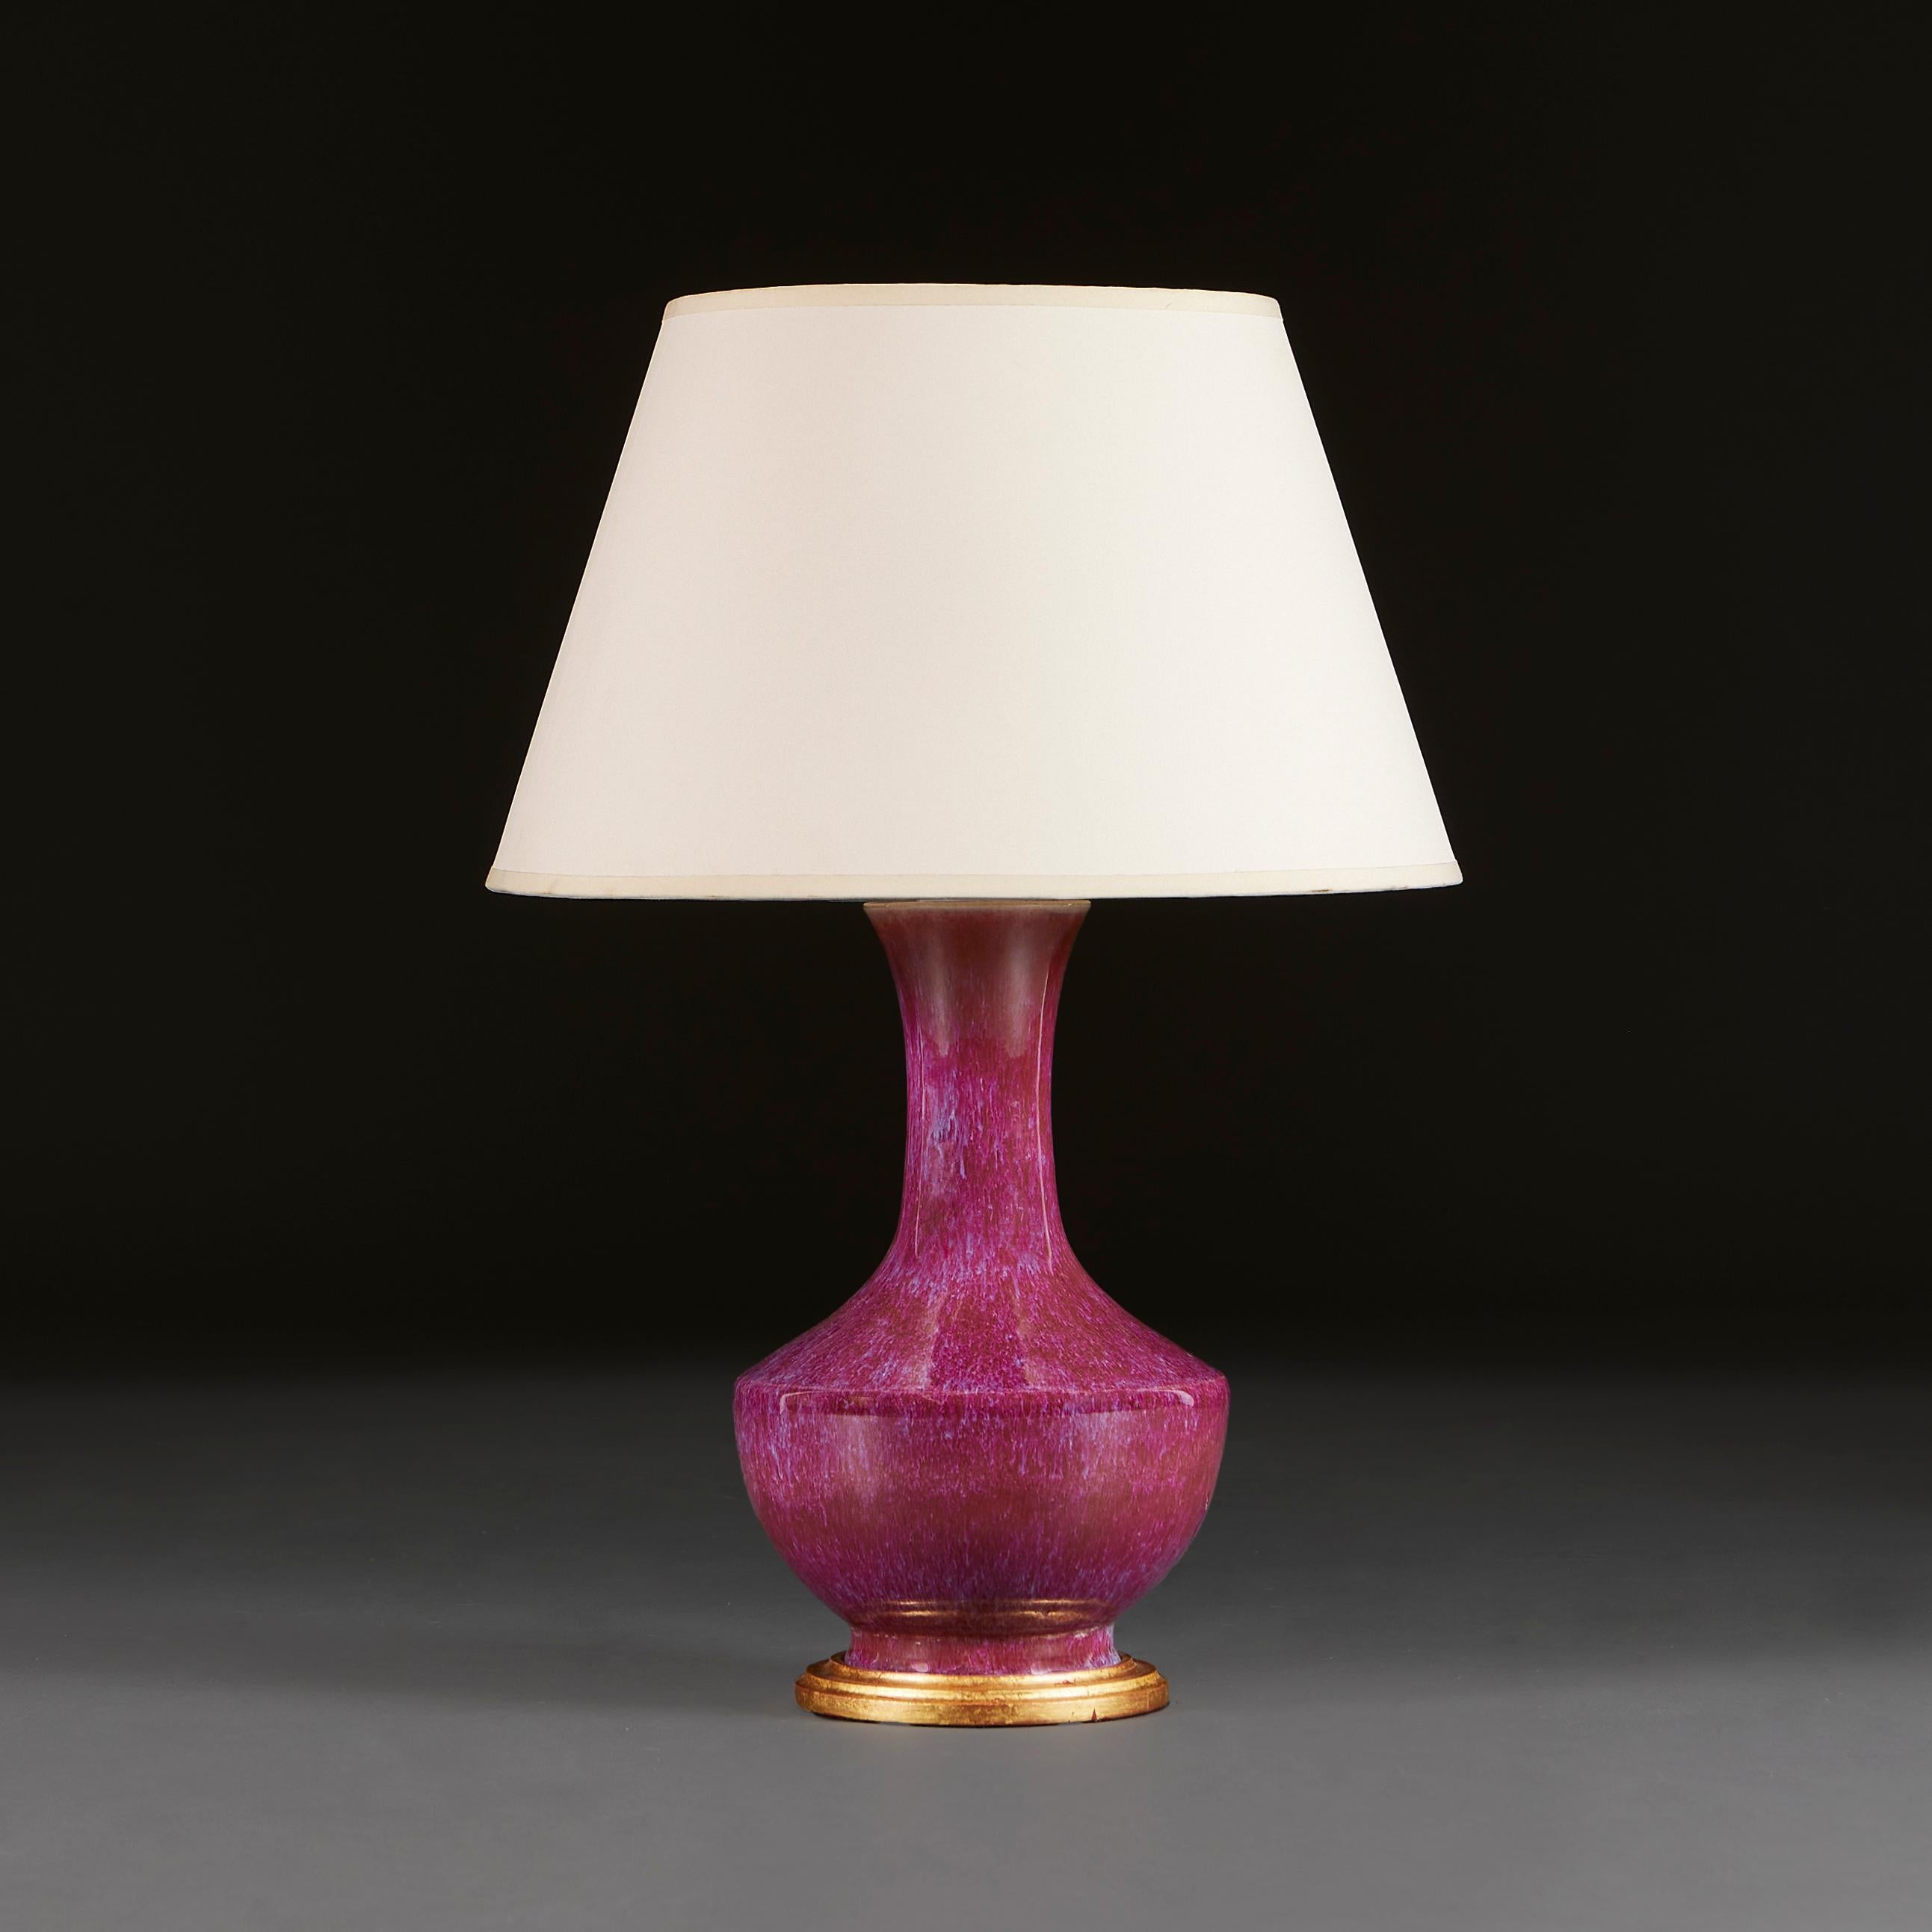 China, circa 1900

An early twentieth century Chinese Jun-Ware style vase with a flare elongated neck and tapering shoulders in a plum Flambé glaze, now mounted as a lamp on a giltwood base. 

Height 34.00cm
Diameter 23.00cm

Please note: This is